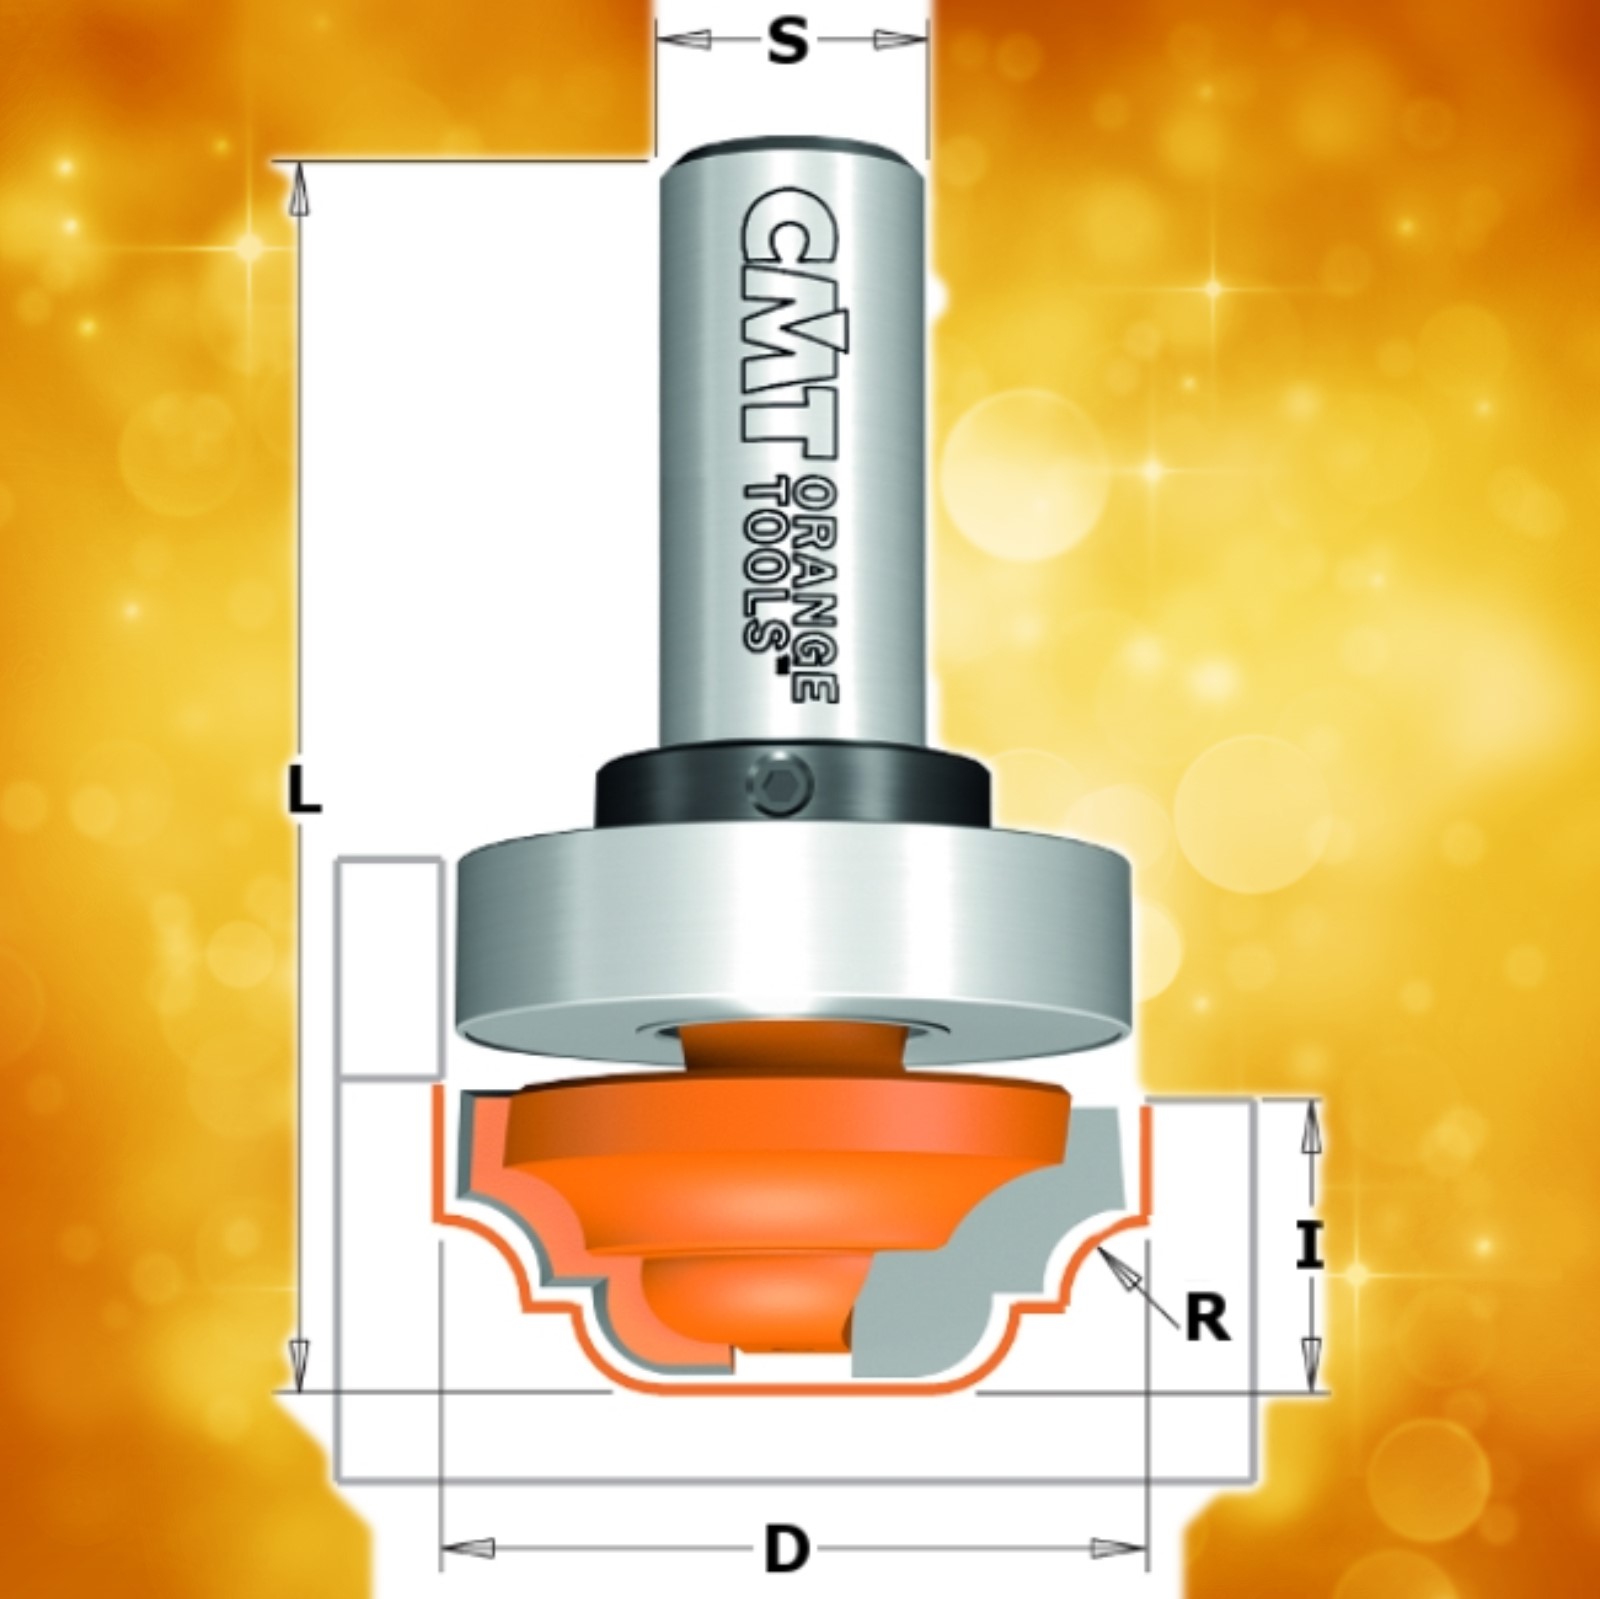 CMT Plunge Ogee Router Bit with bearing 848.191.11B, 3/4" diameter, 7/16" cutting length, 1/4" shank